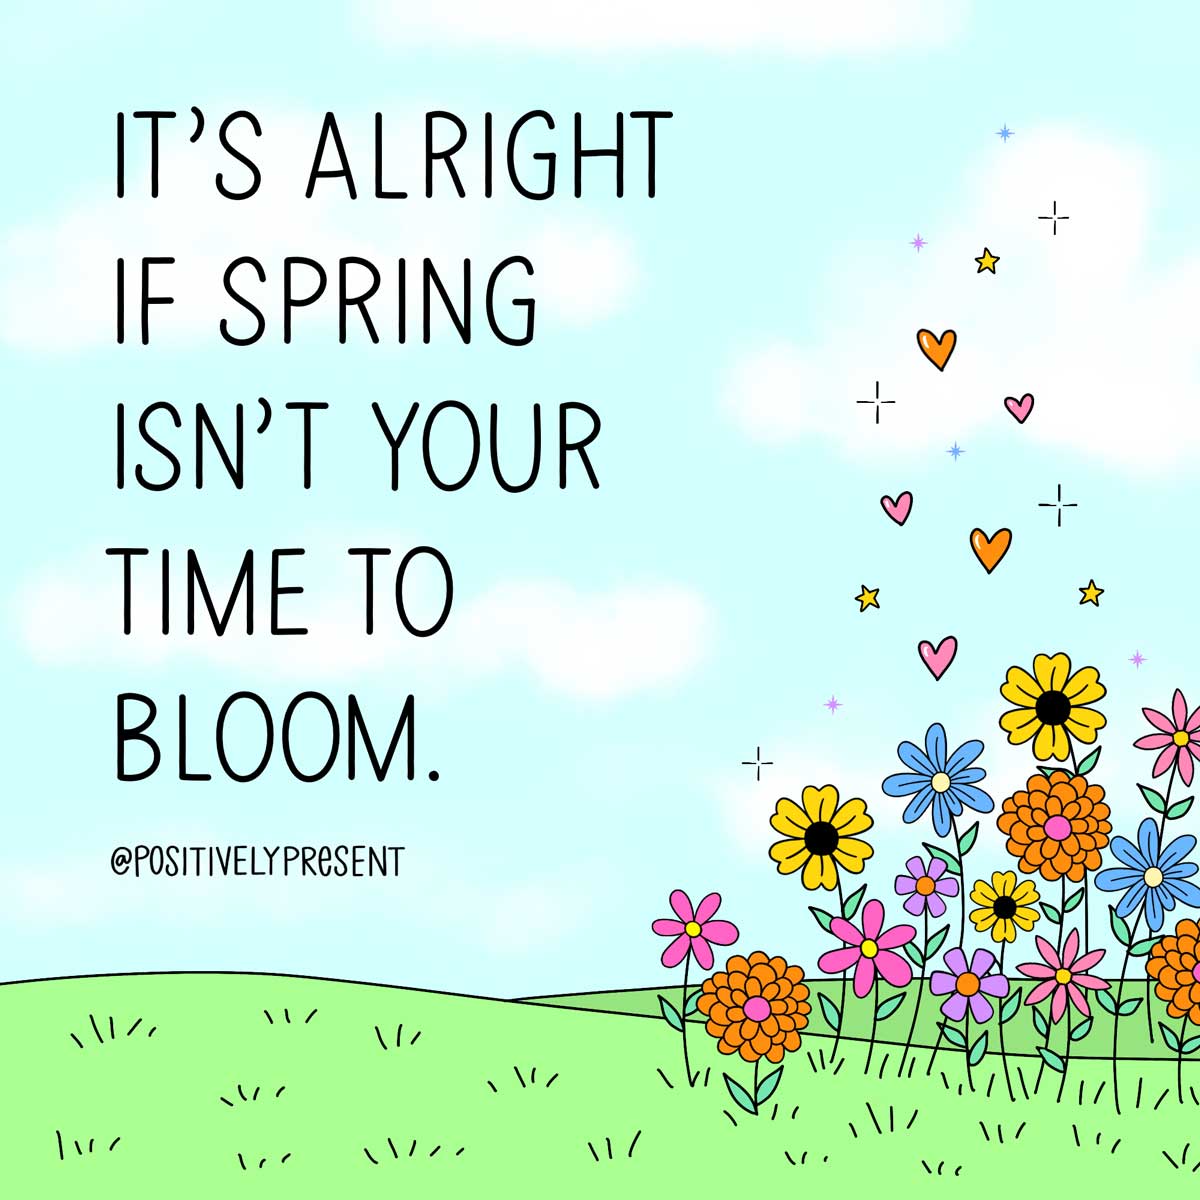 drawing of spring flowers says it's alright if spring isn't your time to bloom.